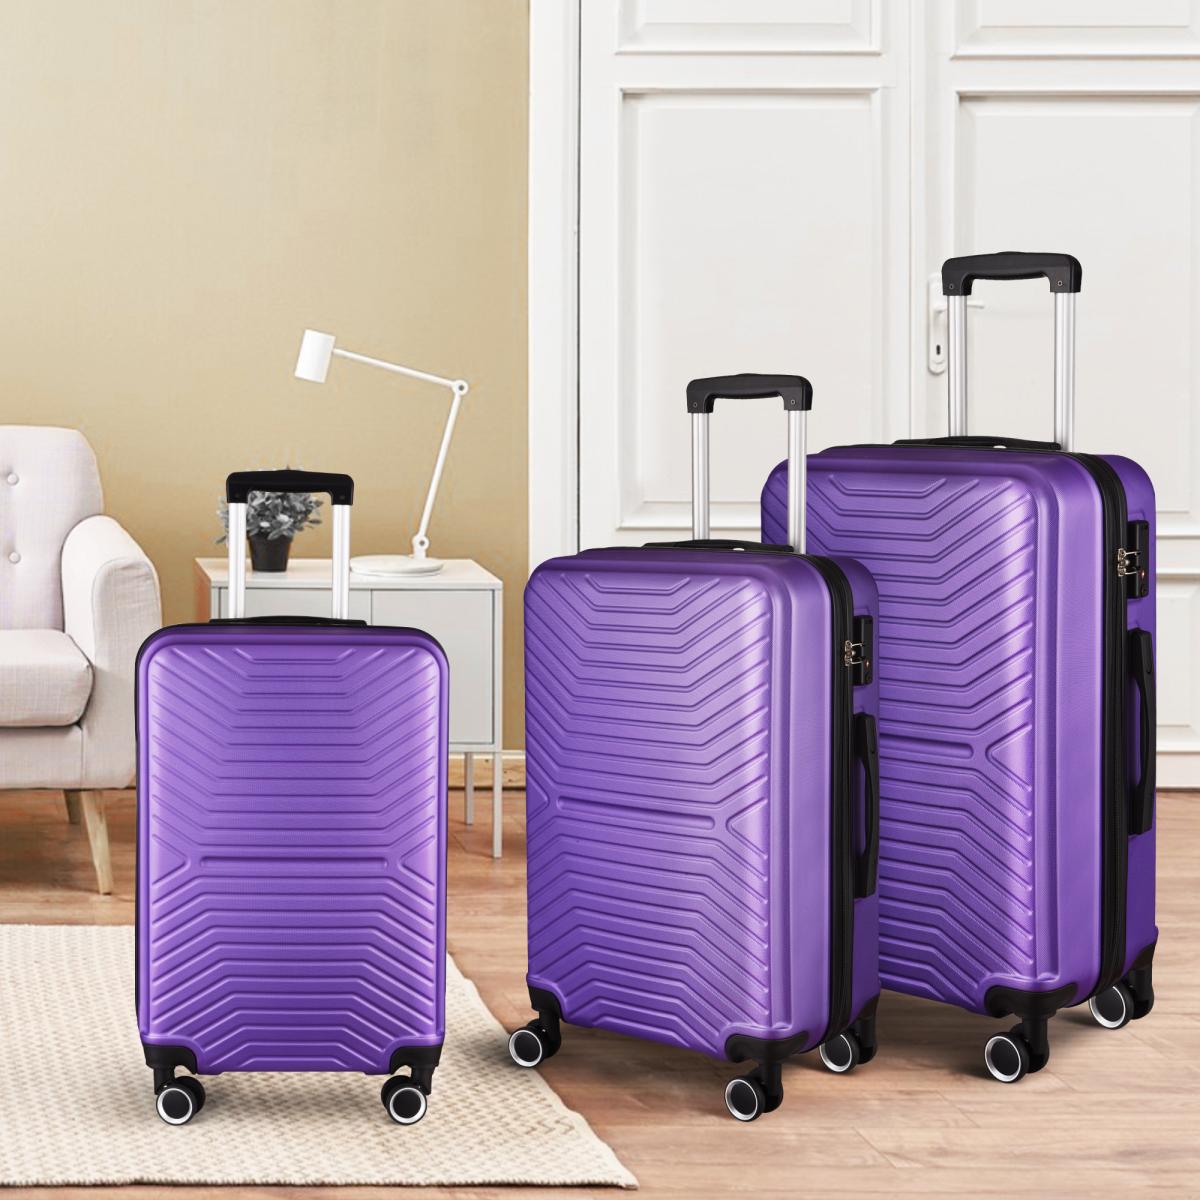 Luggage Sets 3 Piece Suitcase Set Hard Shell Carry on Suitcases with Spinner Wheels Suitcase with Tsa Lock 20in/24in/28in